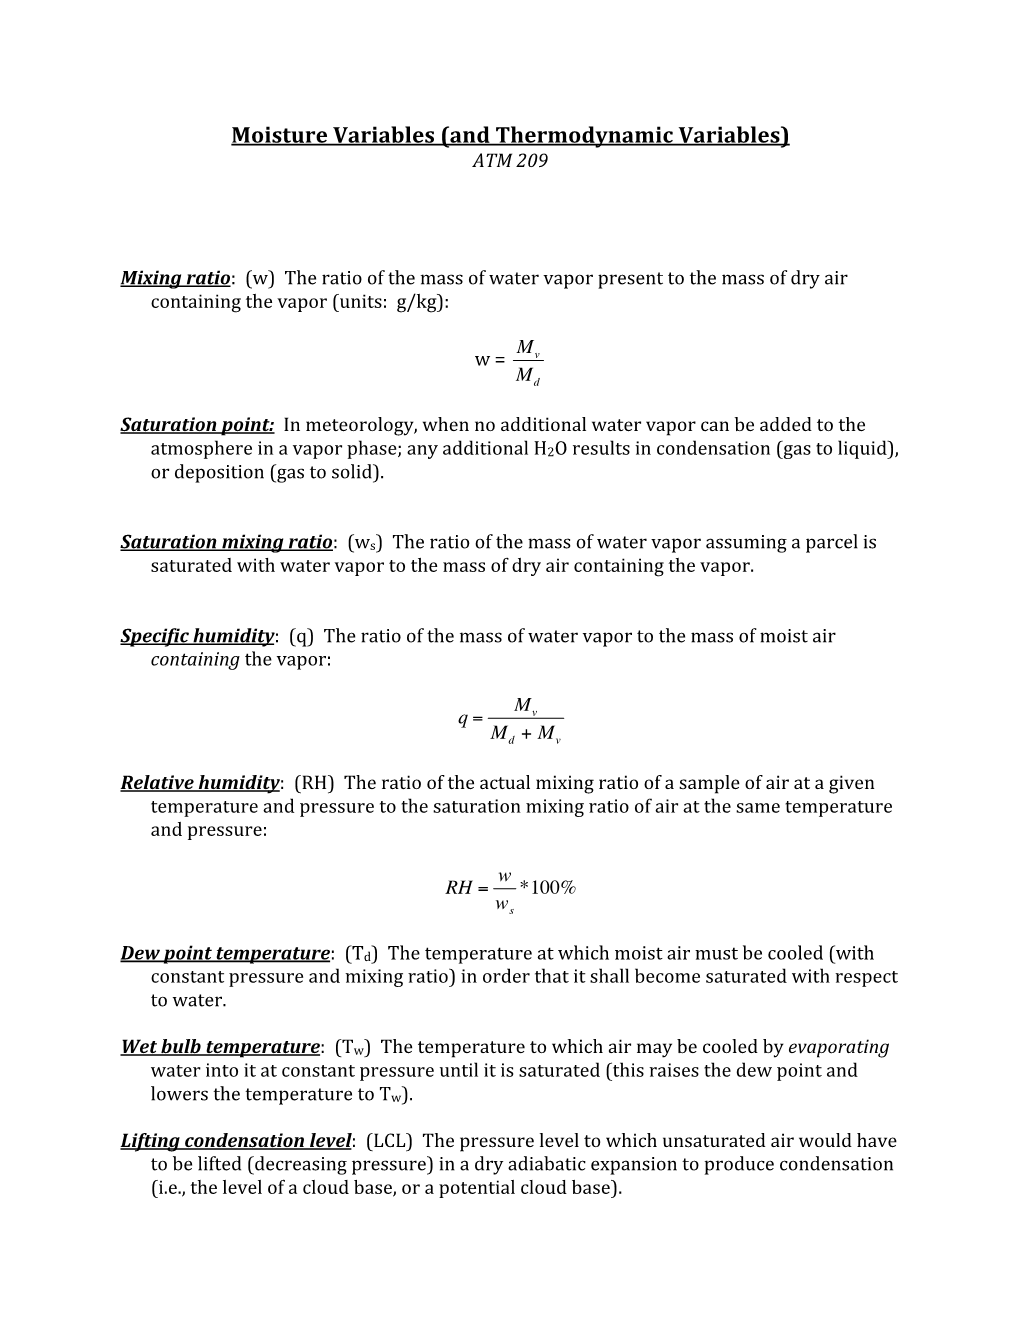 Moisture Variables (And Thermodynamic Variables) ATM 209